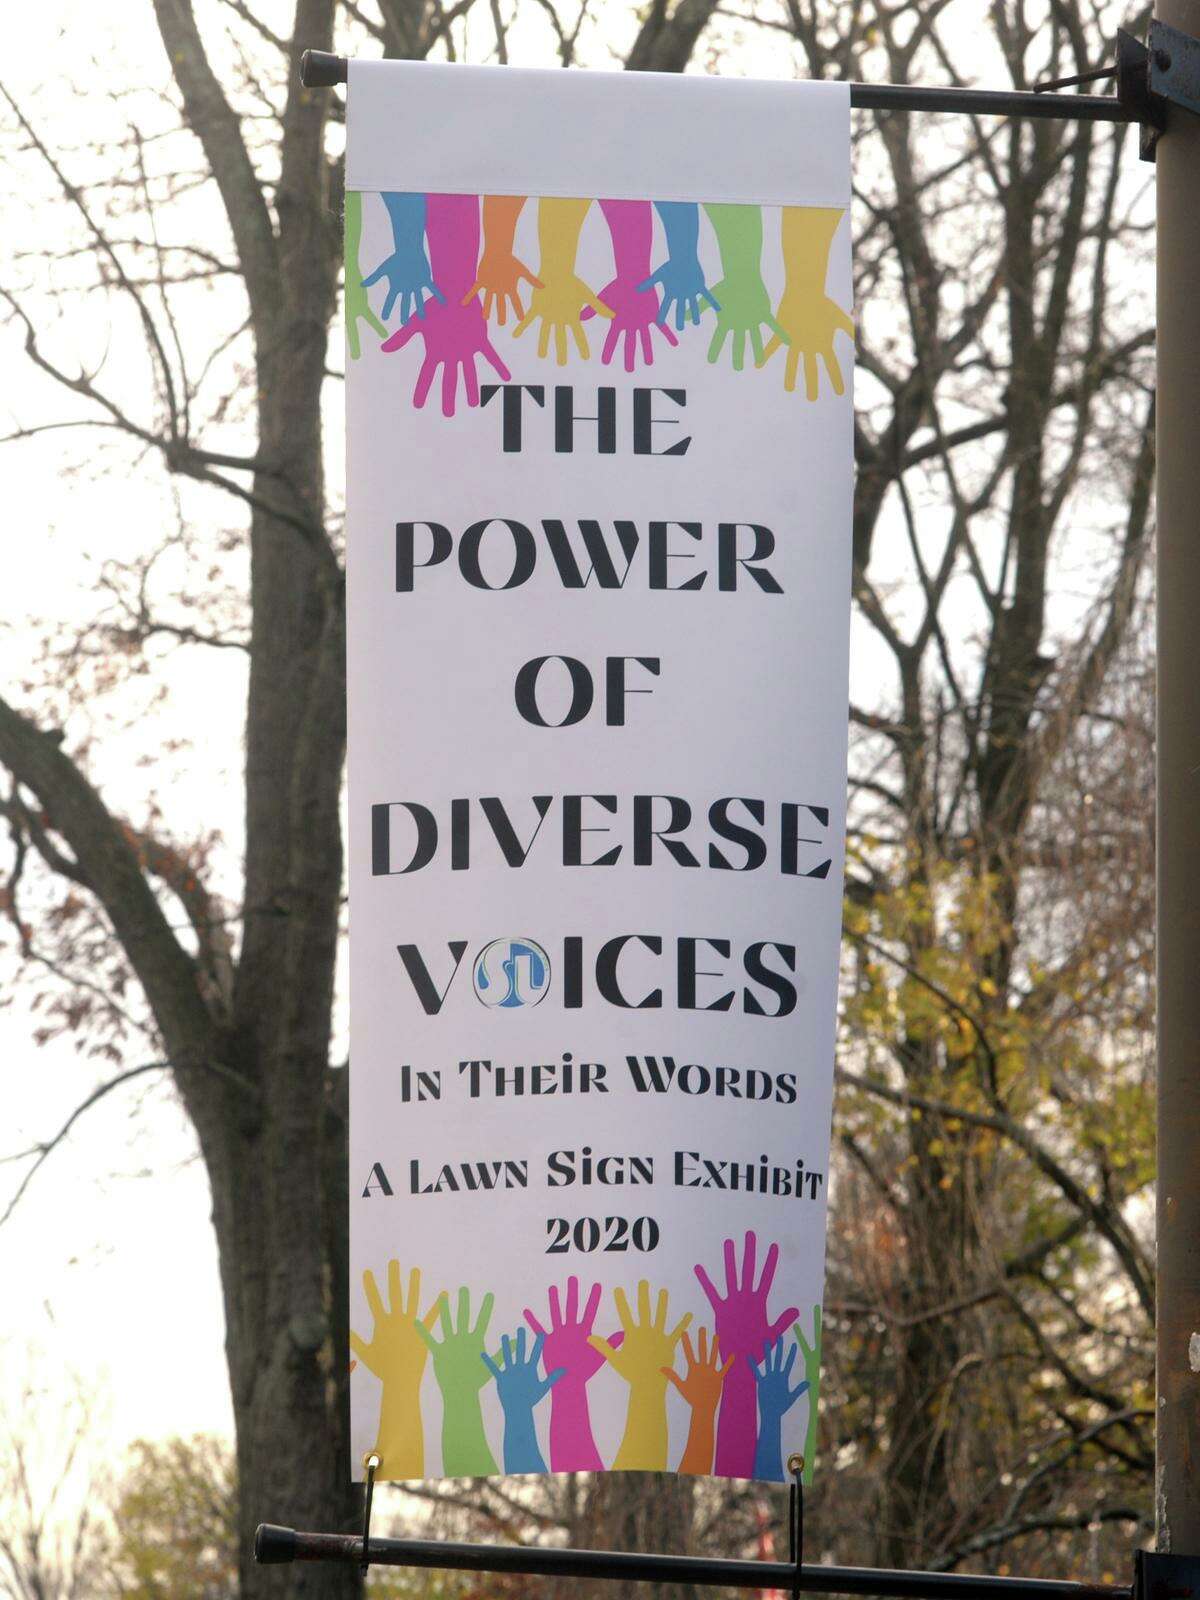 A banner promoting the Power of Diverse Voices lawn signs currently on display of the Stratford Library, in Stratford, Conn. Nov. 19, 2020. A ribbon-cutting Monday was attended by Mayor Laura Hoydick, Police Chief Joseph McNeil and Library Board members Robyn Proto, Joel Pleban, Peg Sheahan, Janice Cupee and Gladys A. Ramos. The project is the first of several dealing with racism and implicit bias planned by the library in conjunction with the town, CARE (Citizens Addressing Racial Equity), Sterling House Community Center, the Council of Churches, Rotary Club of Stratford and the Arts Alliance of Stratford. Szymanski said several groups were working on their own anti-racism objectives independently before learning of each other’s work and collaborating.